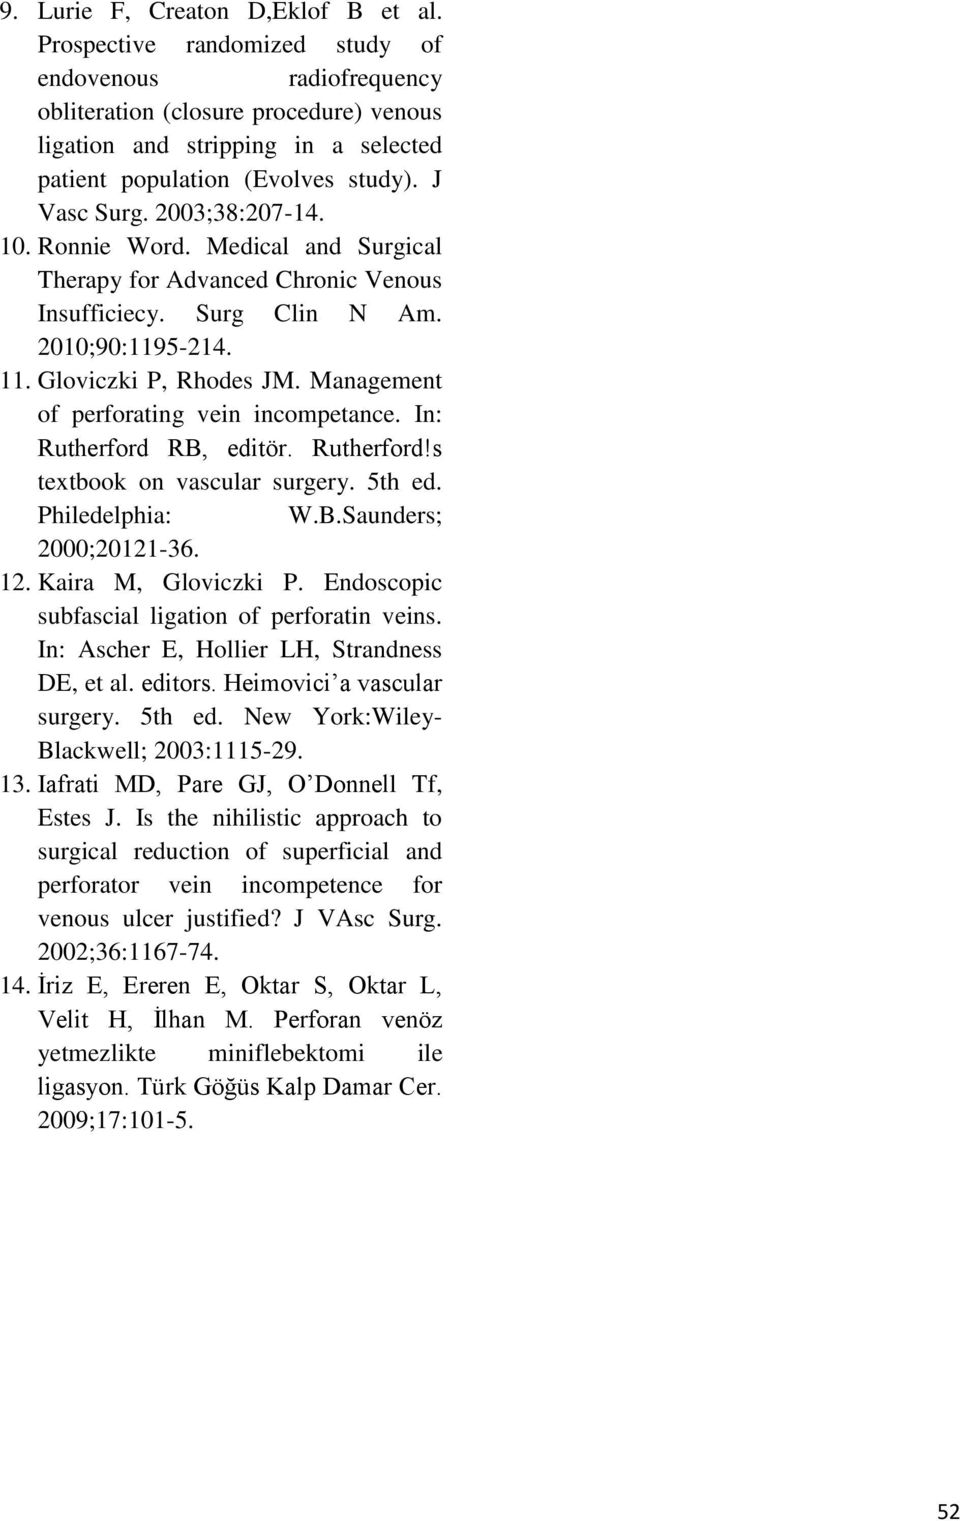 10. Ronnie Word. Medical and Surgical Therapy for Advanced Chronic Venous Insufficiecy. Surg Clin N Am. 2010;90:1195-214. 11. Gloviczki P, Rhodes JM. Management of perforating vein incompetance.